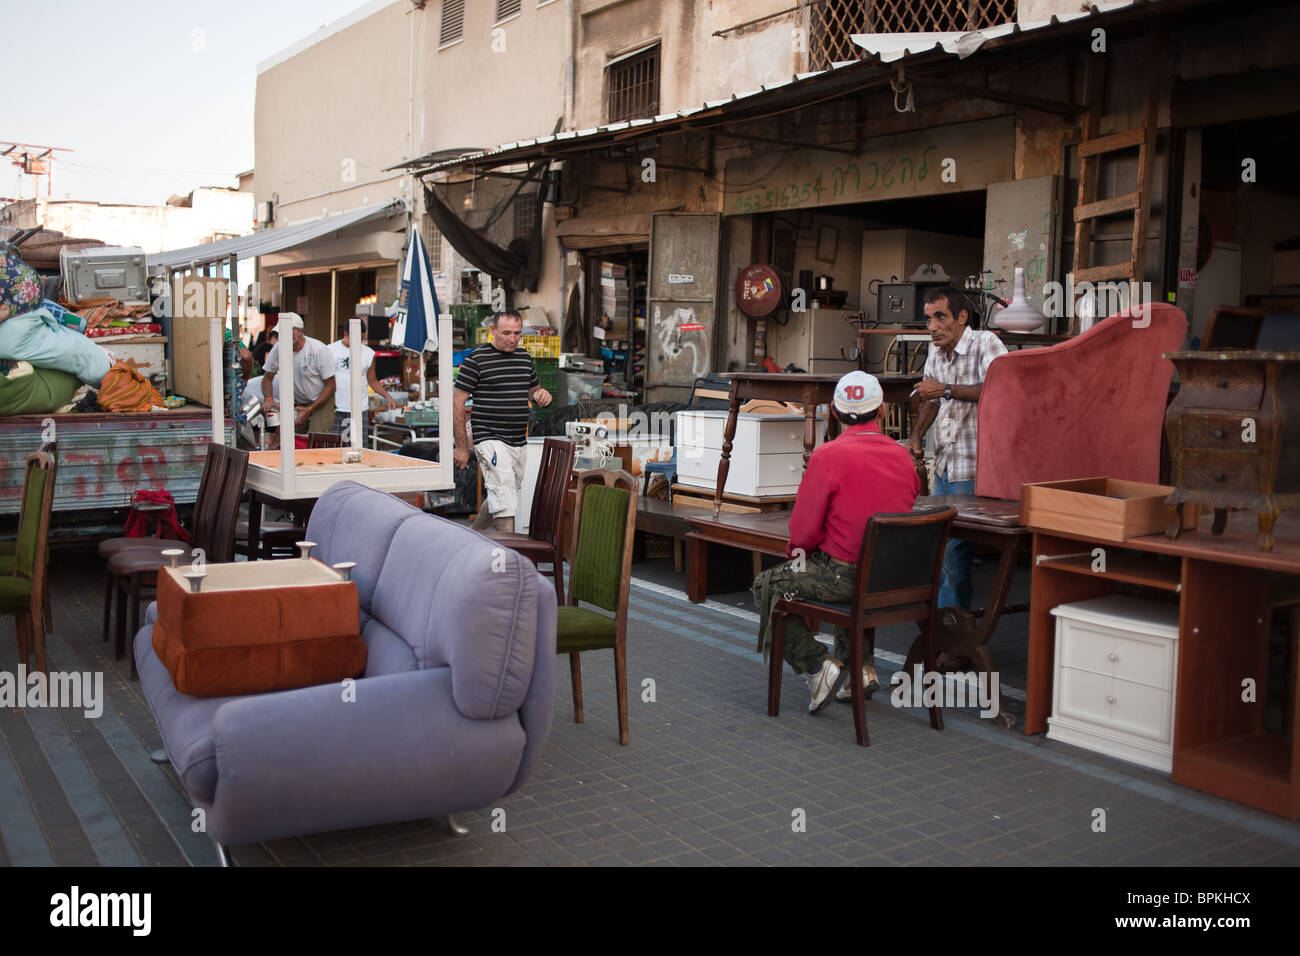 Old And Used Furniture Displayed For Sale At Jaffa Flea Market Stock Photo Alamy